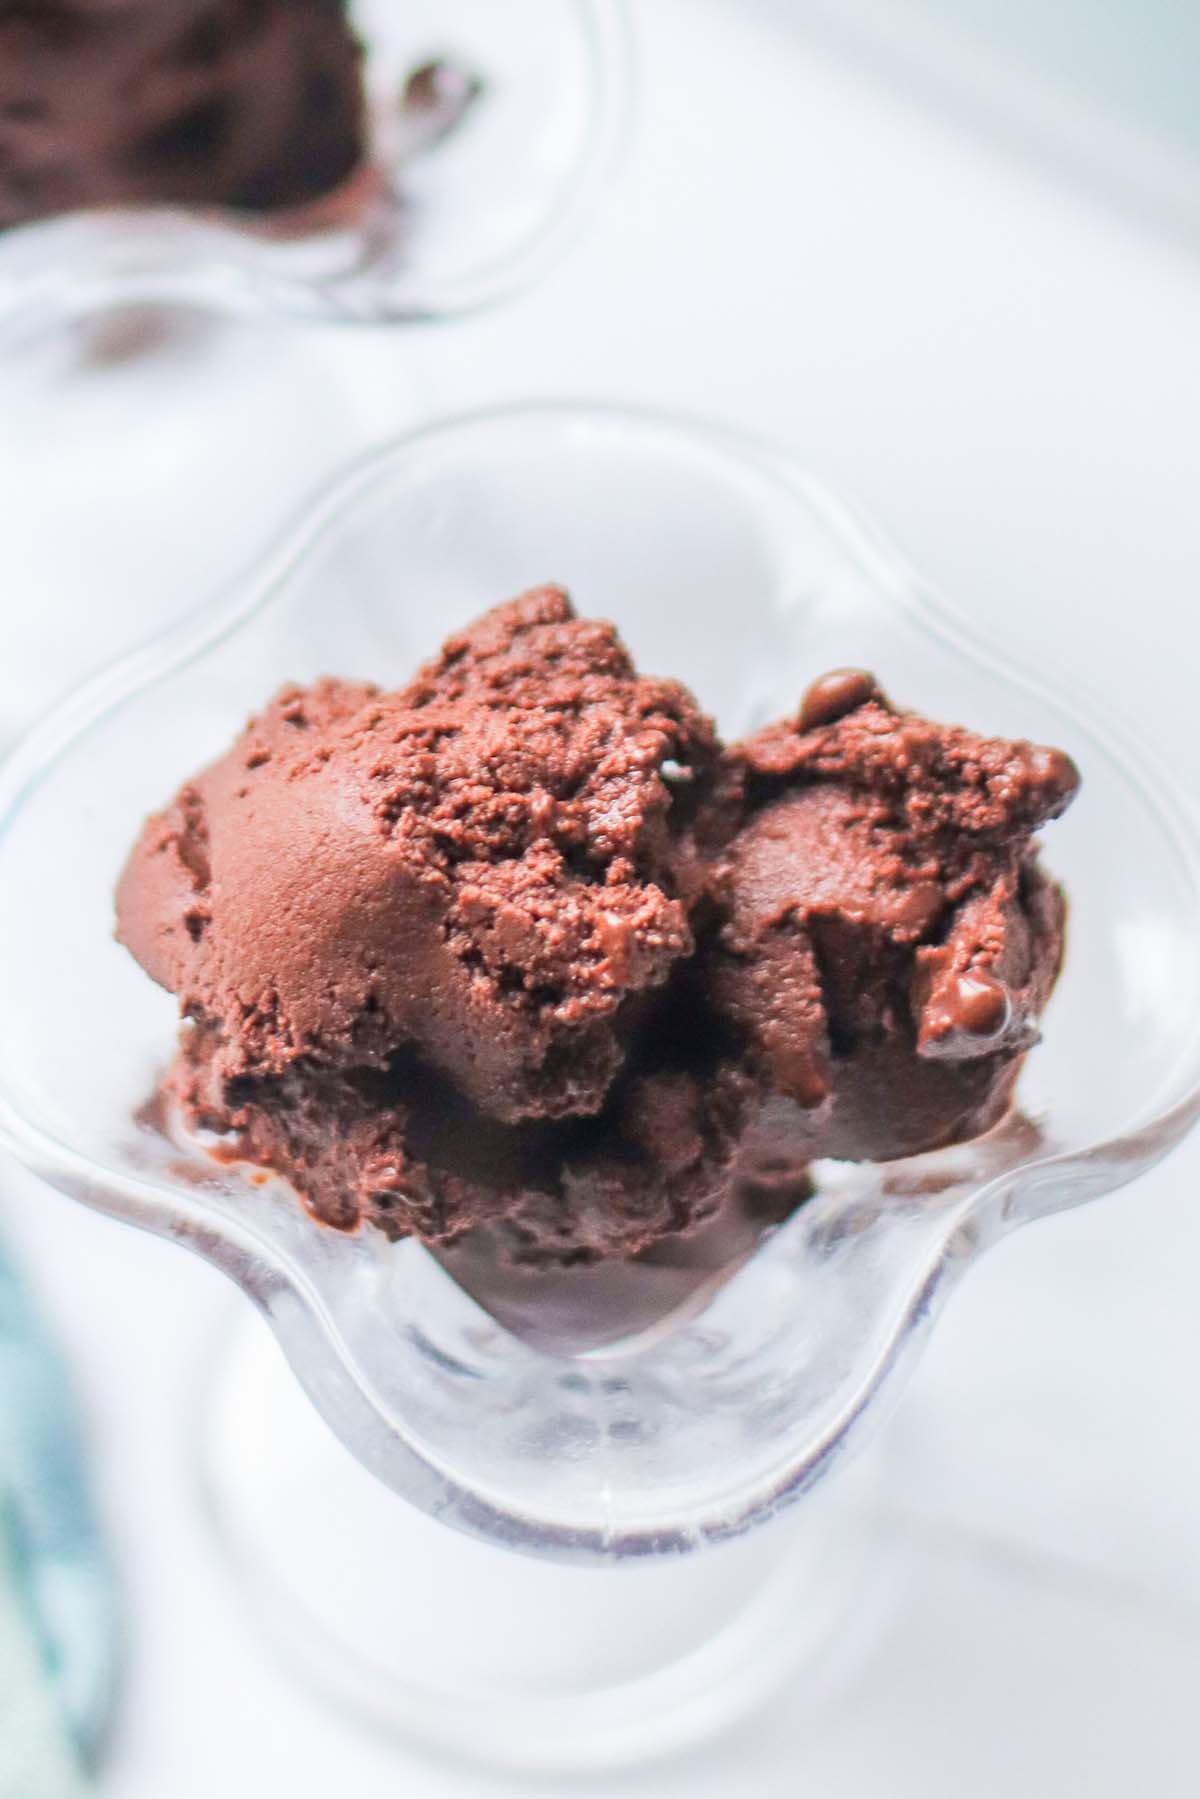 top view of chocolate sorbet scooped in a dish.